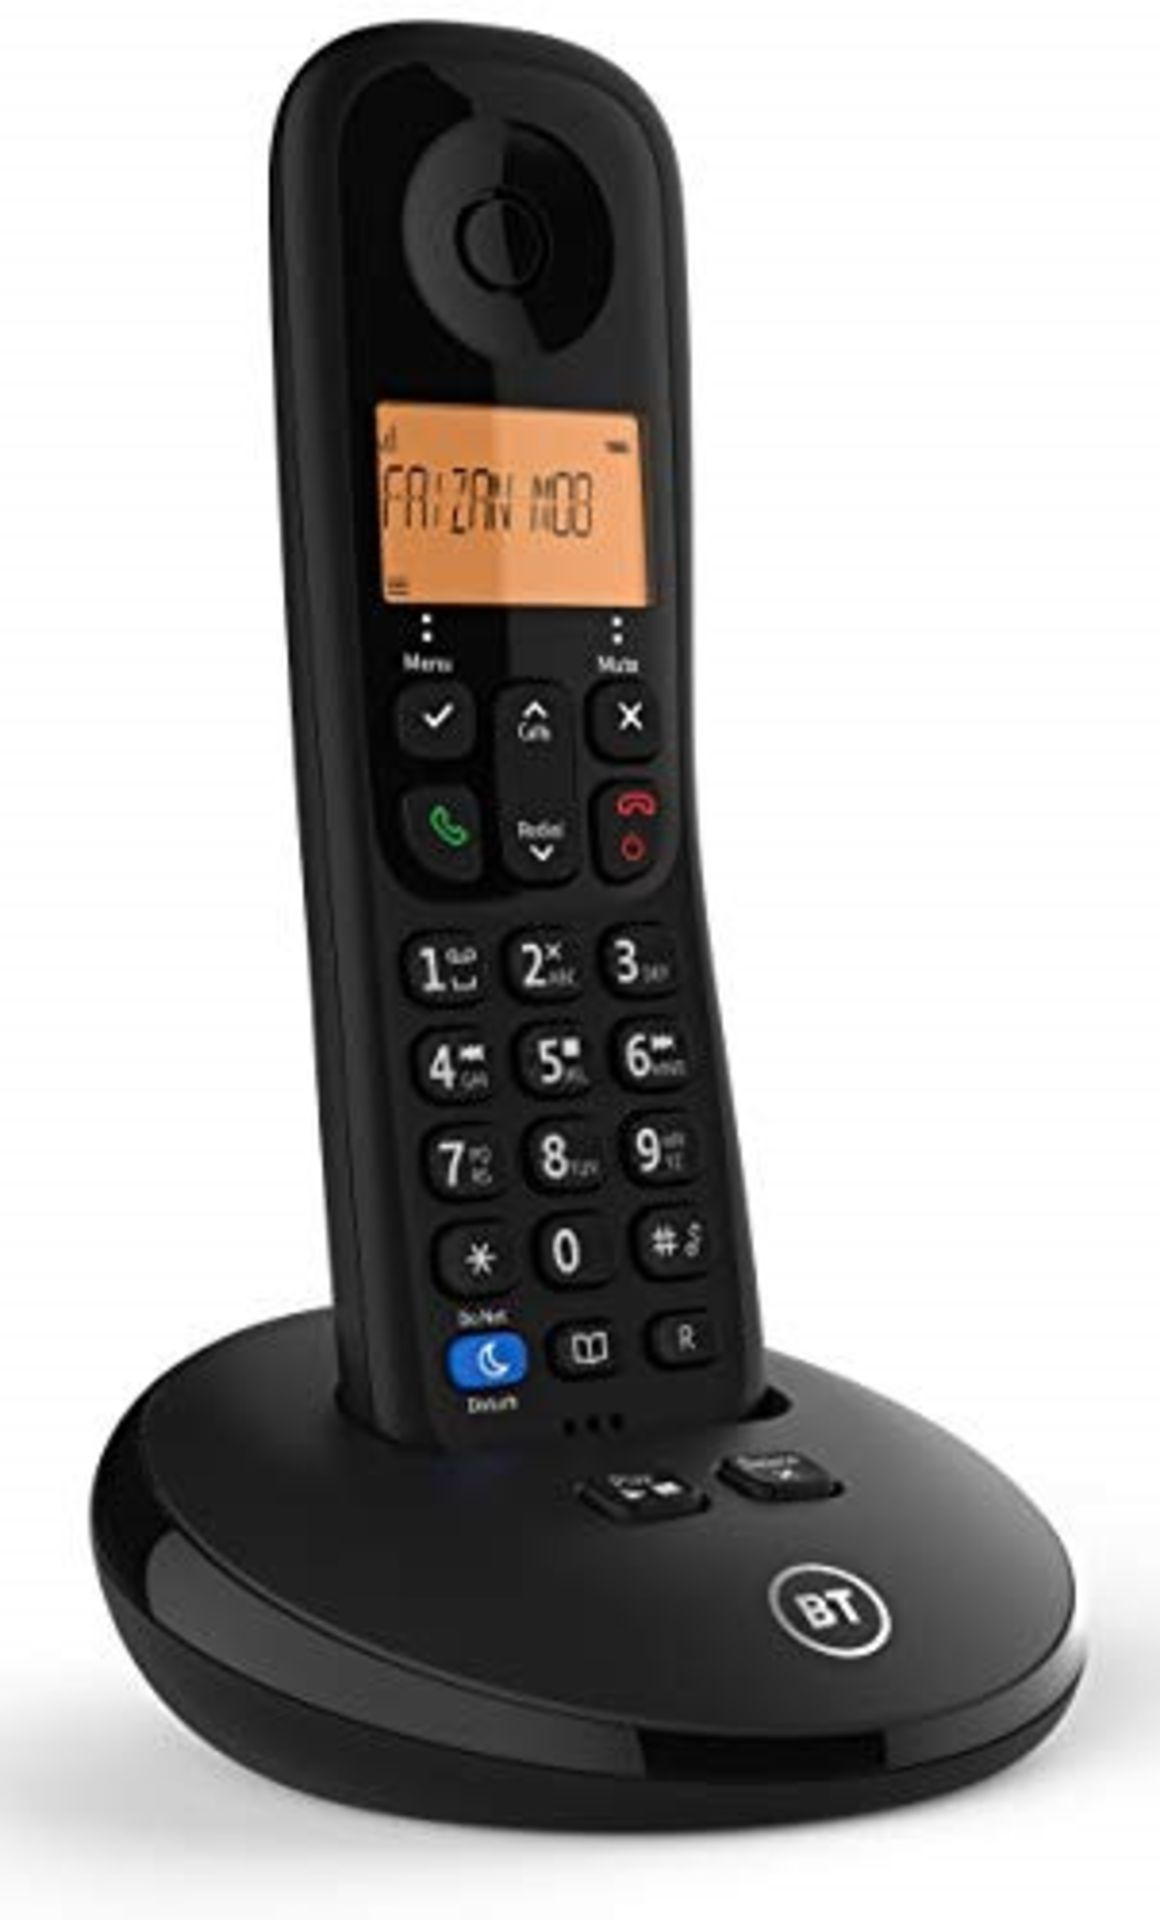 BT Everyday Cordless Home Phone with Basic Call Blocking and Answering Machine, Single